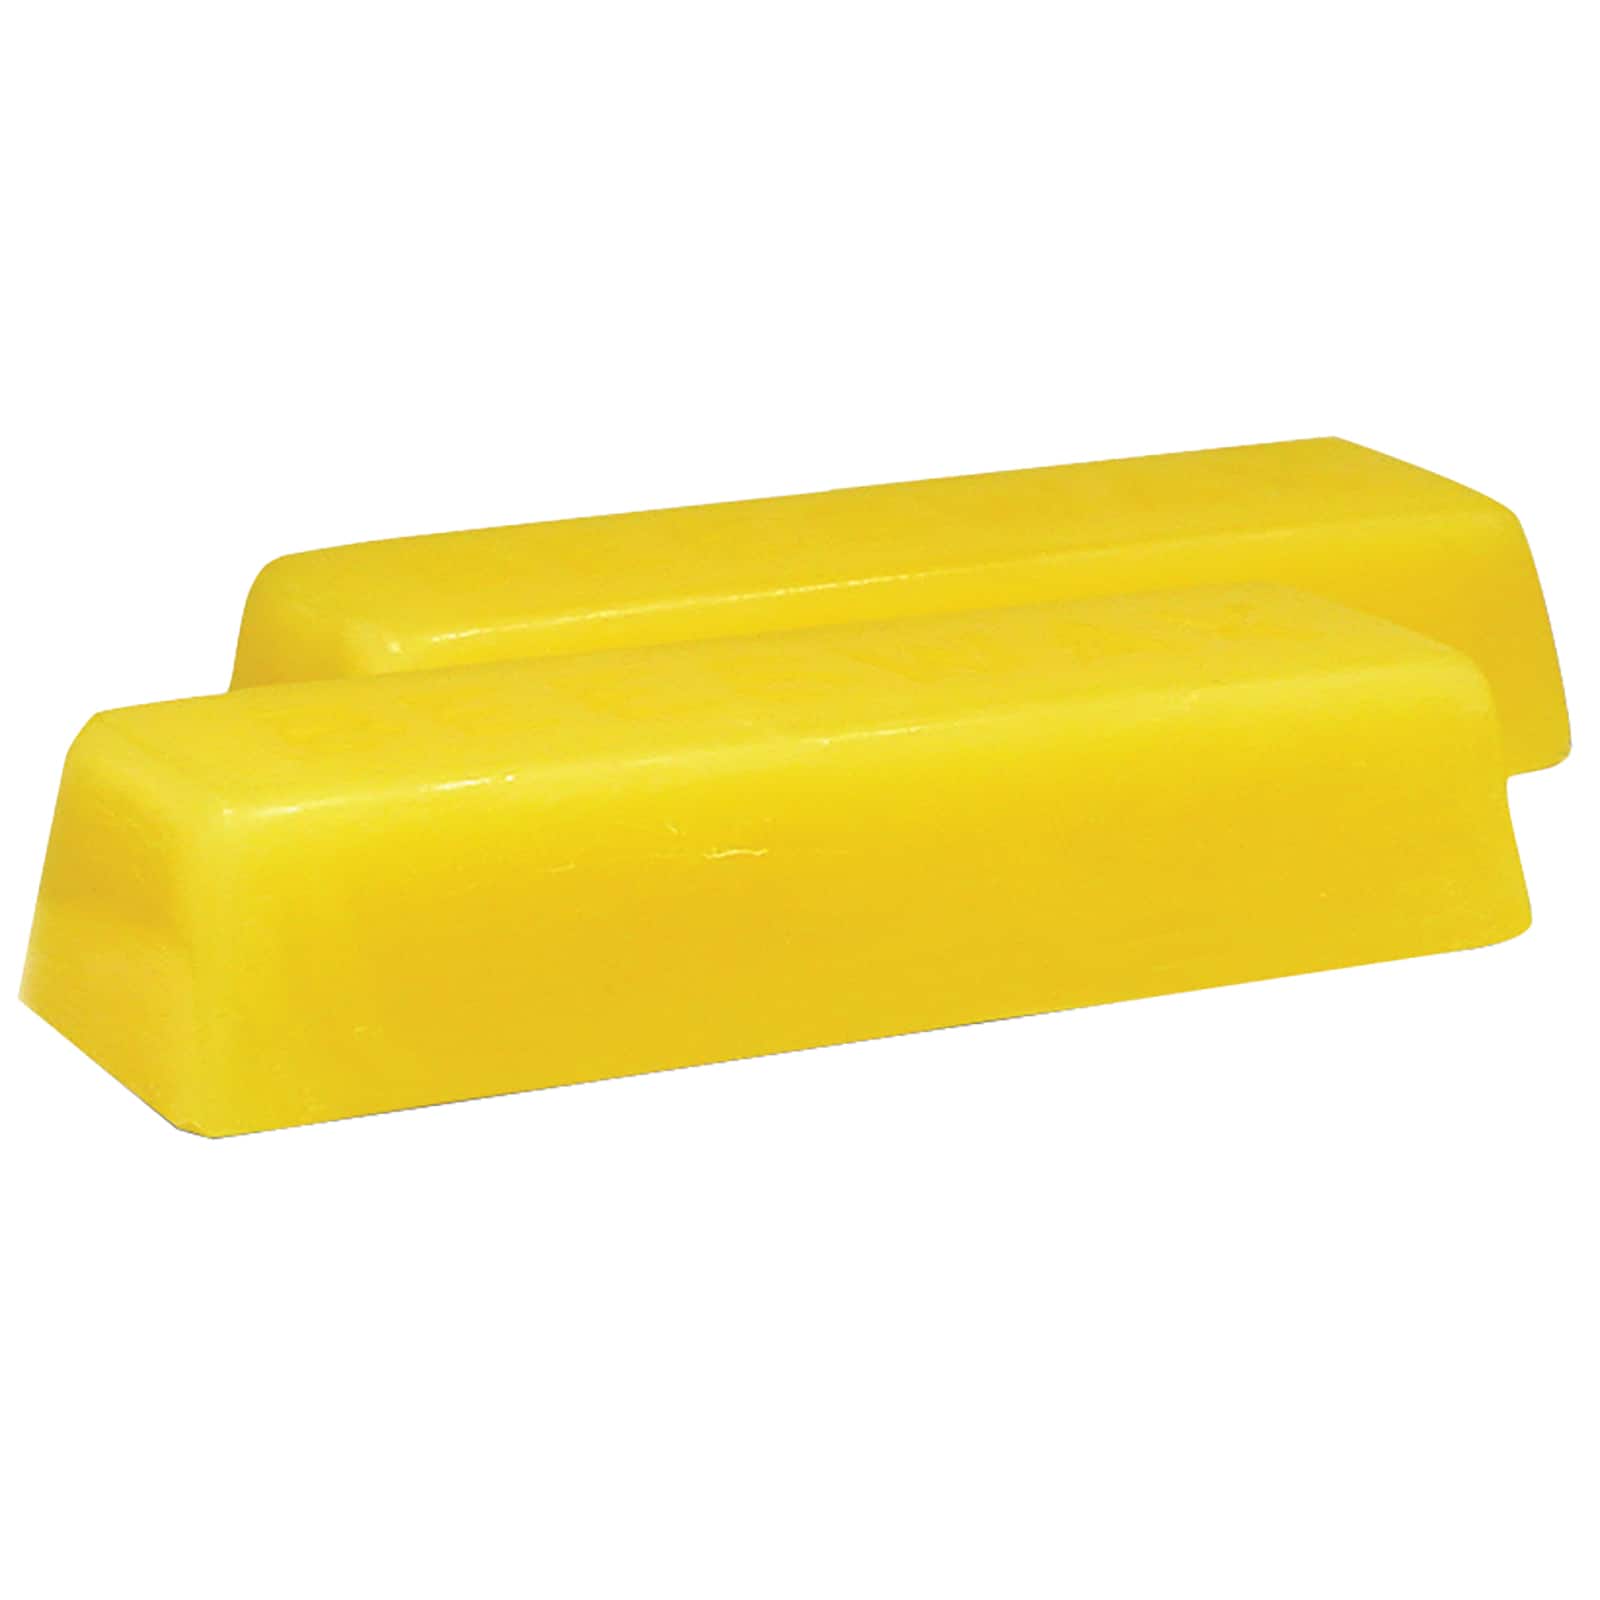 1 Oz Pure Beeswax Bar at Whole Foods Market